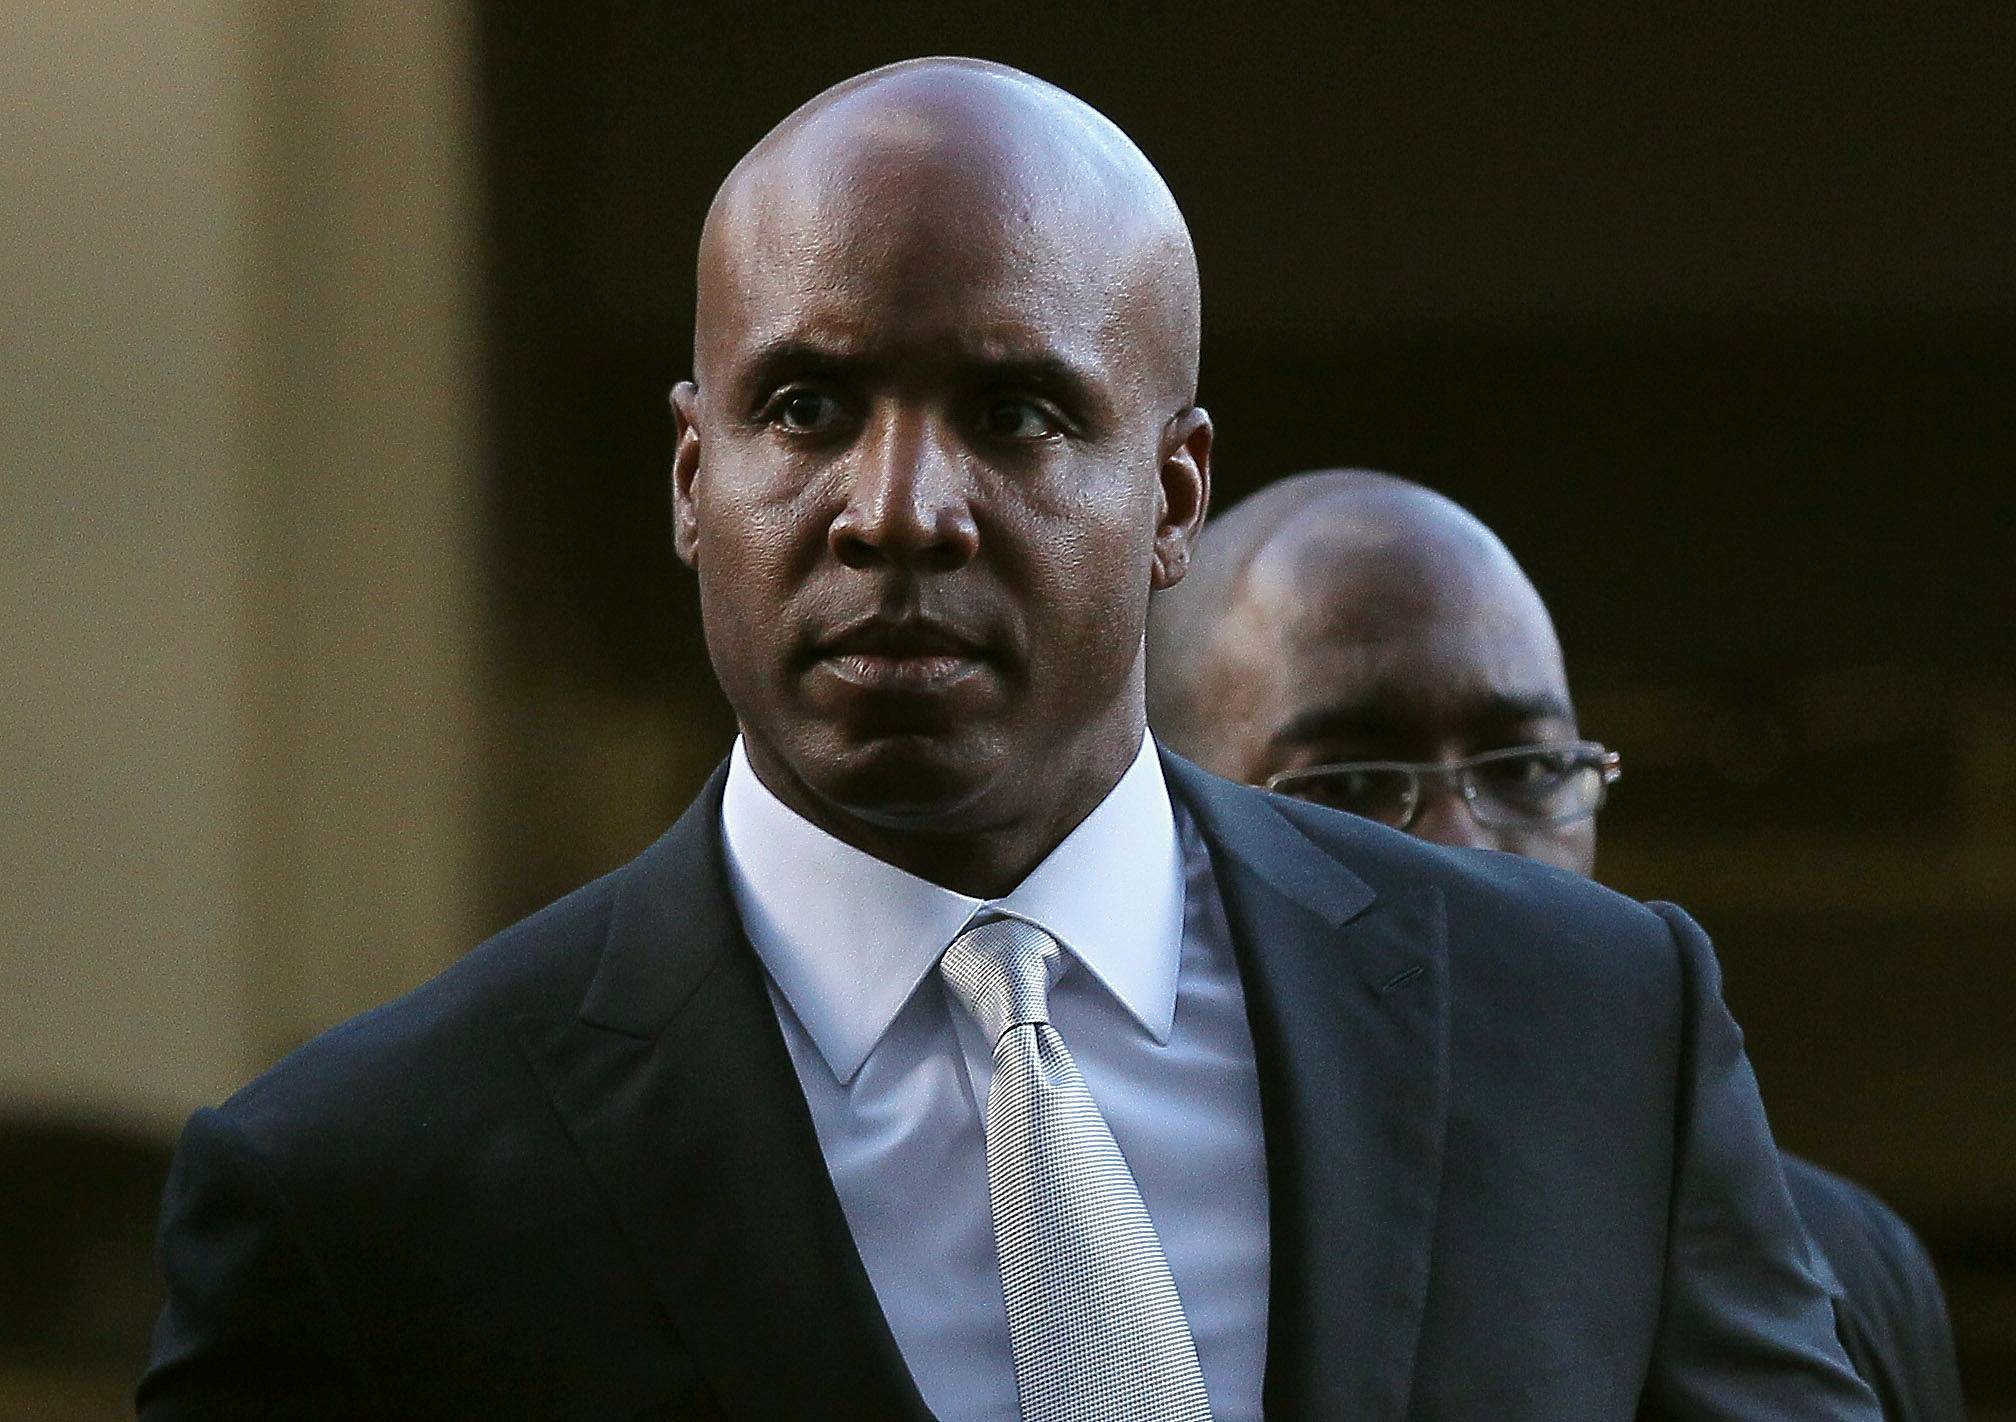 Bonds’ Jury Deliberates - On Monday, the jury in Barry Bonds’ perjury trial continued to deliberate the fate of the fallen baseball star. In the morning, the jury listened to a re-reading of the testimony of Bonds’ personal shopper, Kathy Hoskins. Hoskins was the only one who testified to actually seeing Bonds injected with steroids by his personal trainer, Greg Anderson. On Thursday, the defense rested its case without calling one witness. (Photo: Justin Sullivan/Getty Images)